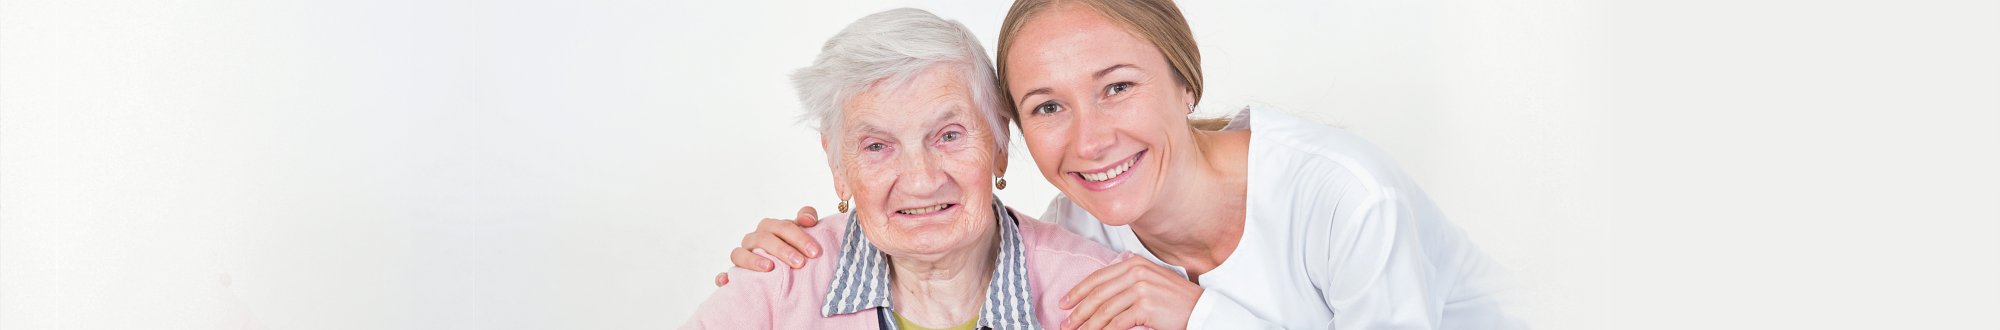 a portrait of a woman and senior woman smiling